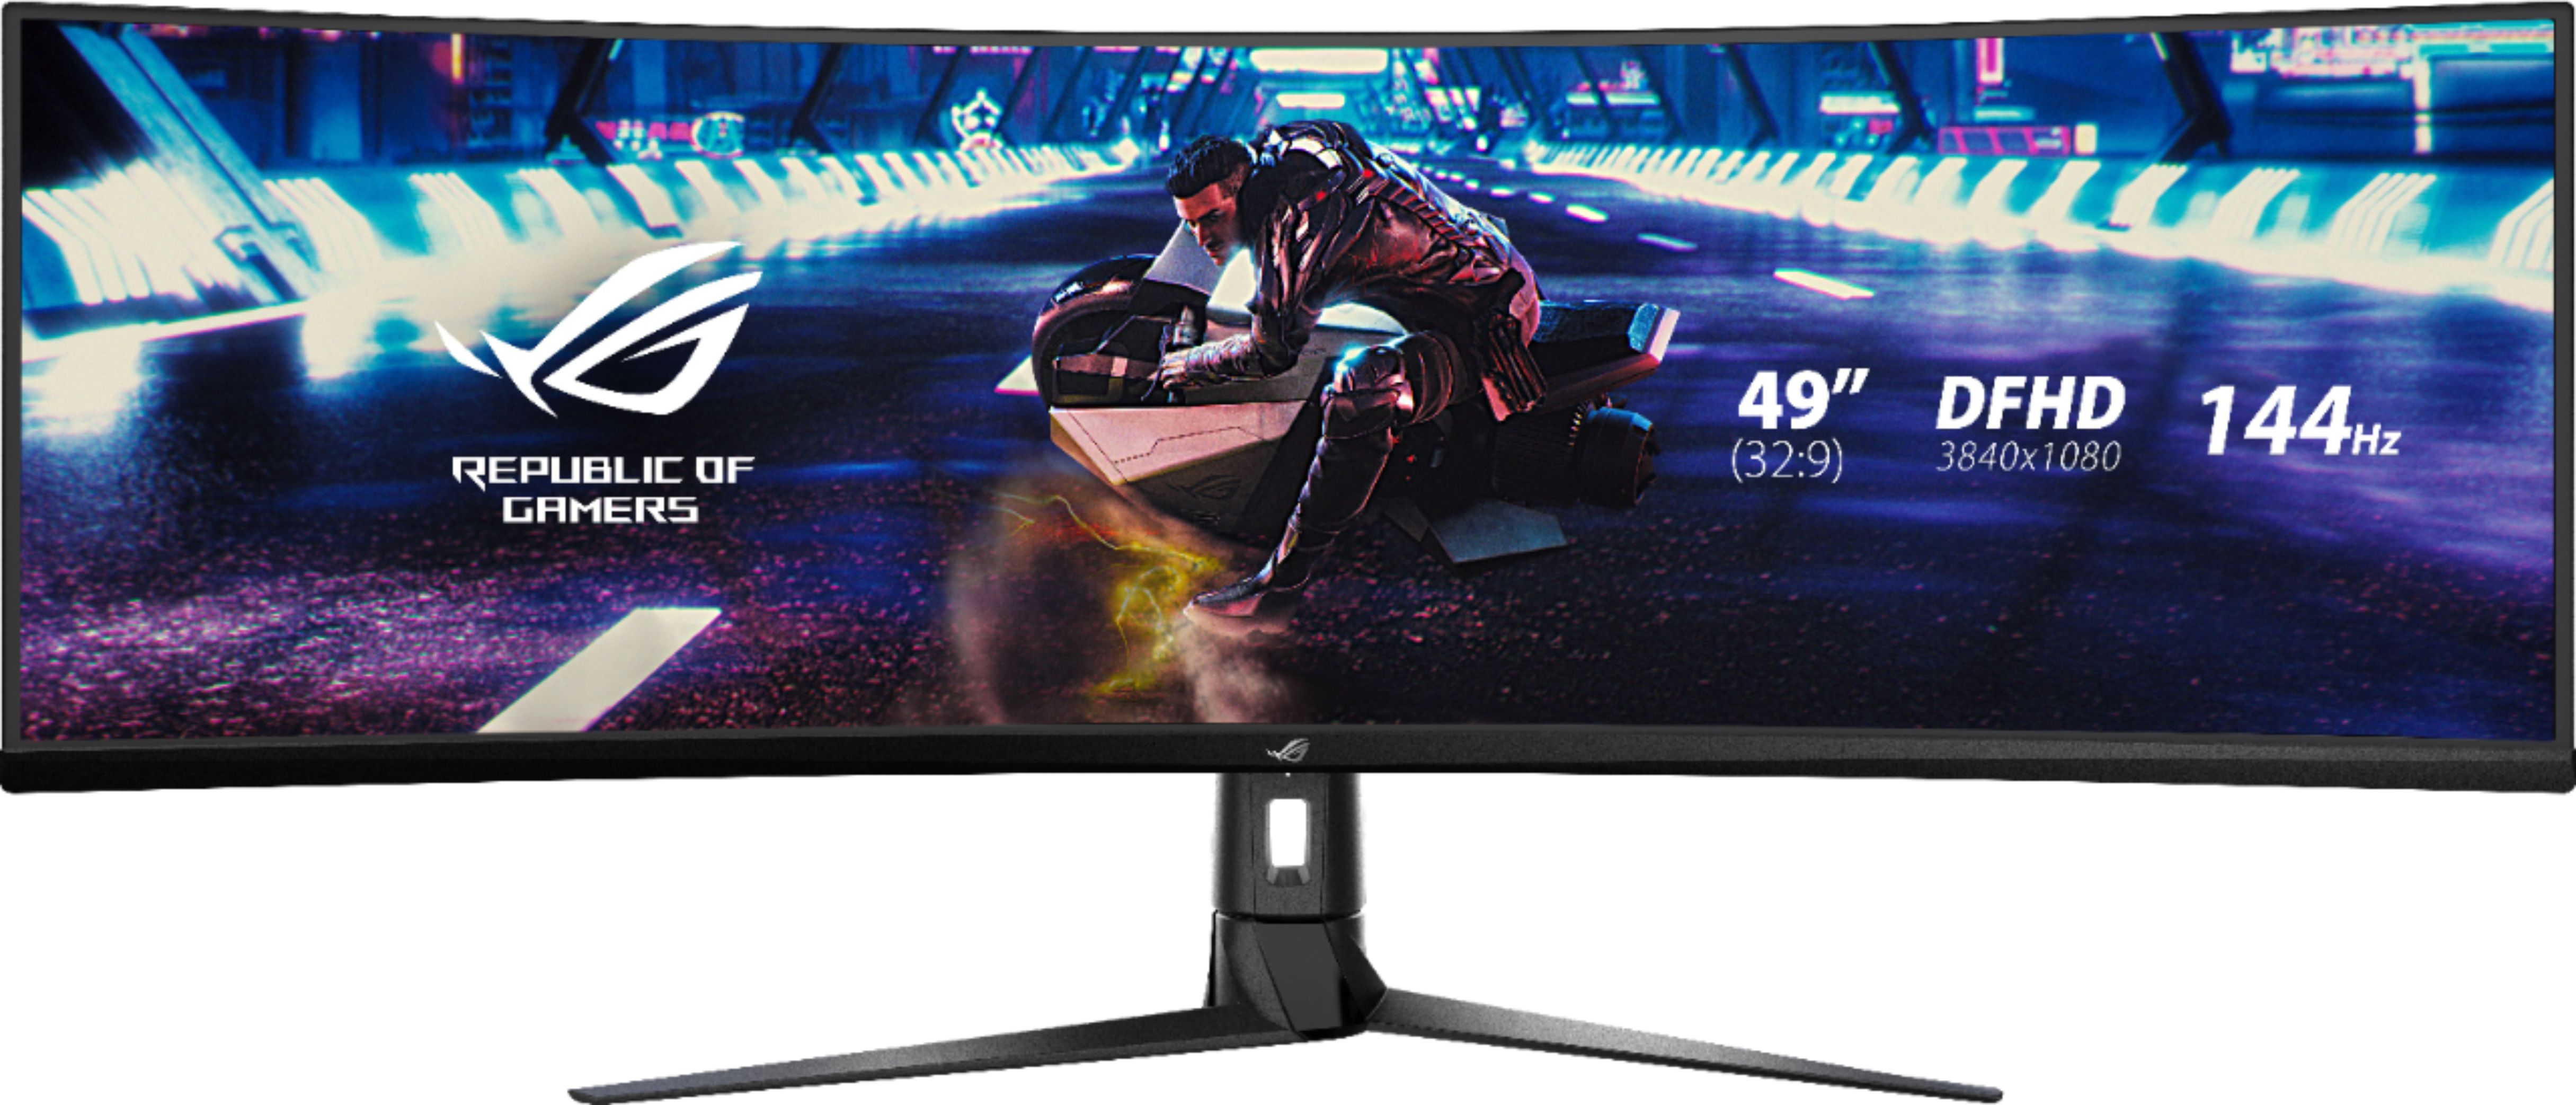 ASUS 49" LED Curved FHD FreeSync Monitor with HDR Black XG49VQ - Best Buy